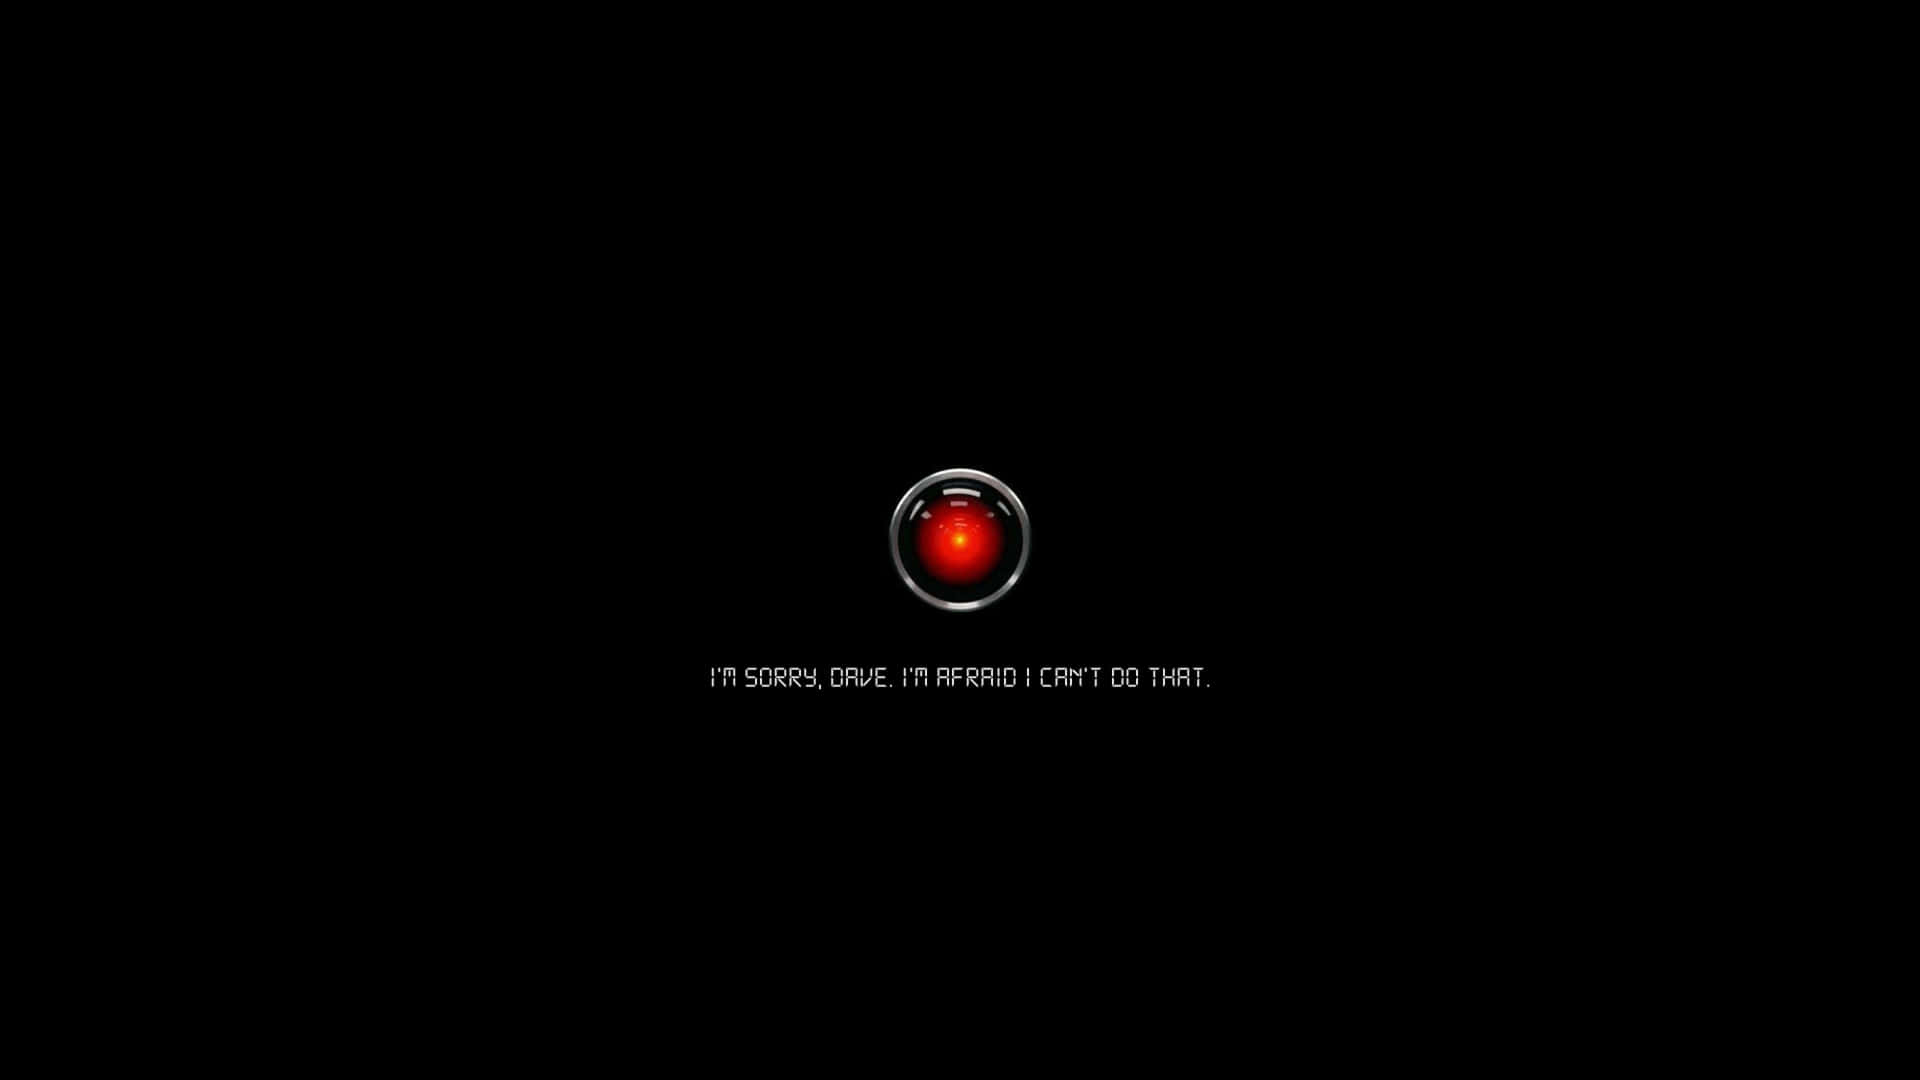 Journey through the Space of "2001: A SPACE ODYSSEY" Wallpaper